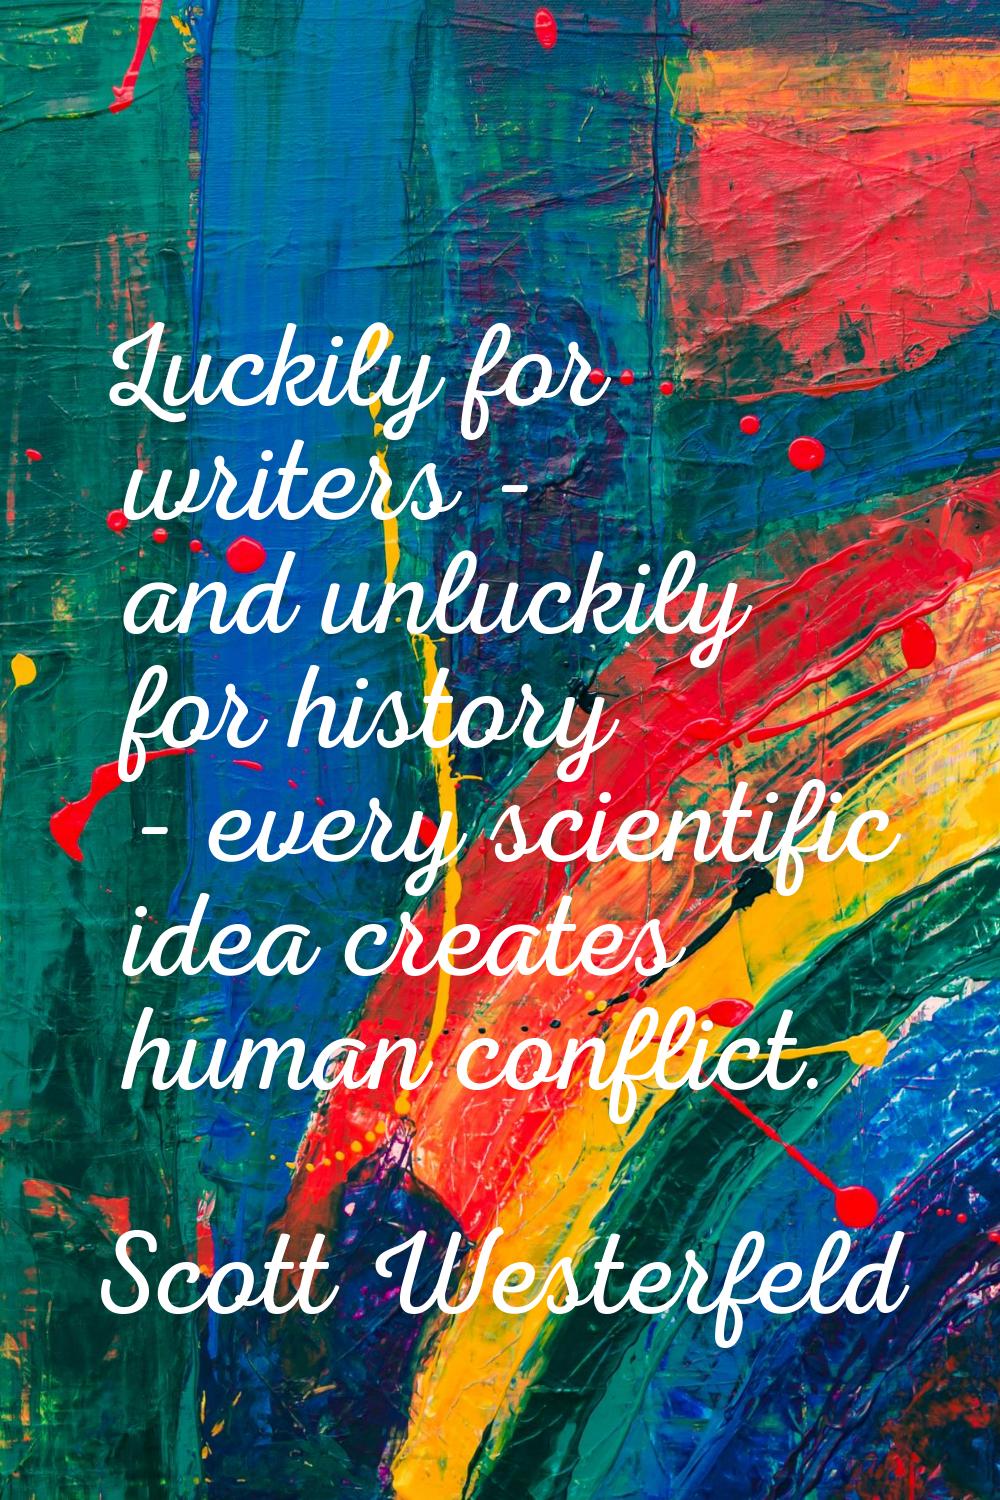 Luckily for writers - and unluckily for history - every scientific idea creates human conflict.